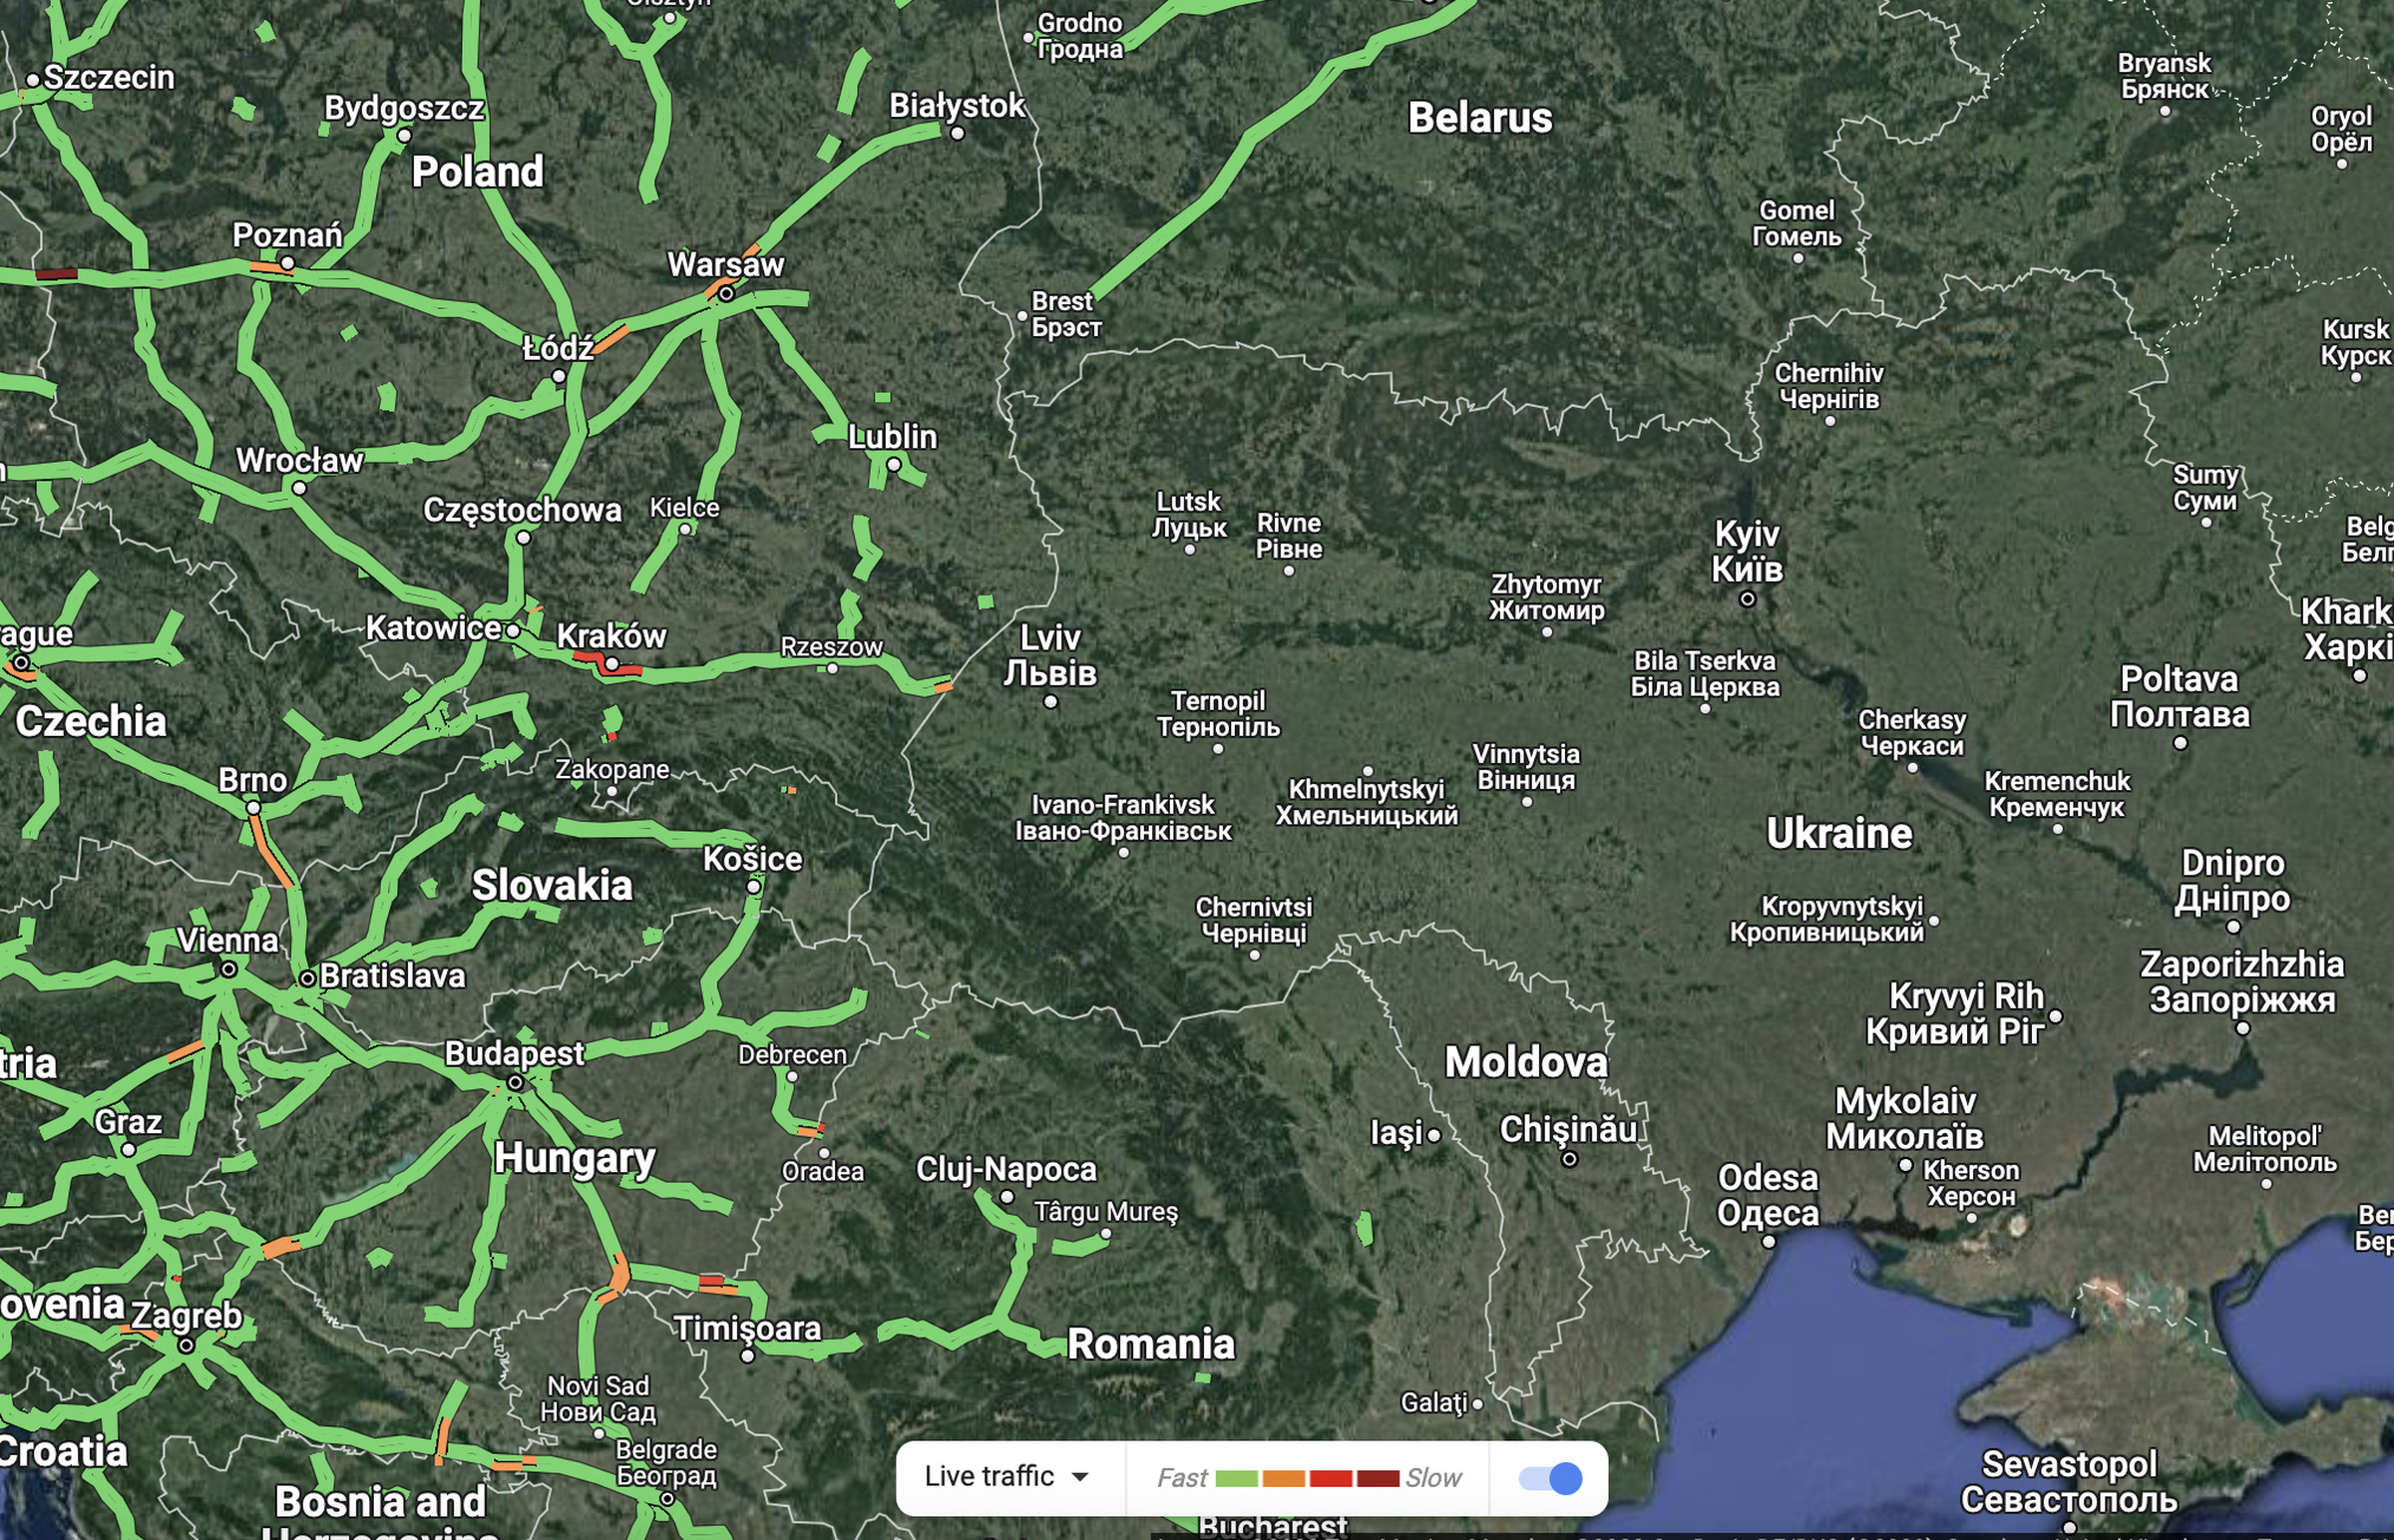 Google Maps shows traffic data in many European countries (left) but not in Ukraine (right). 